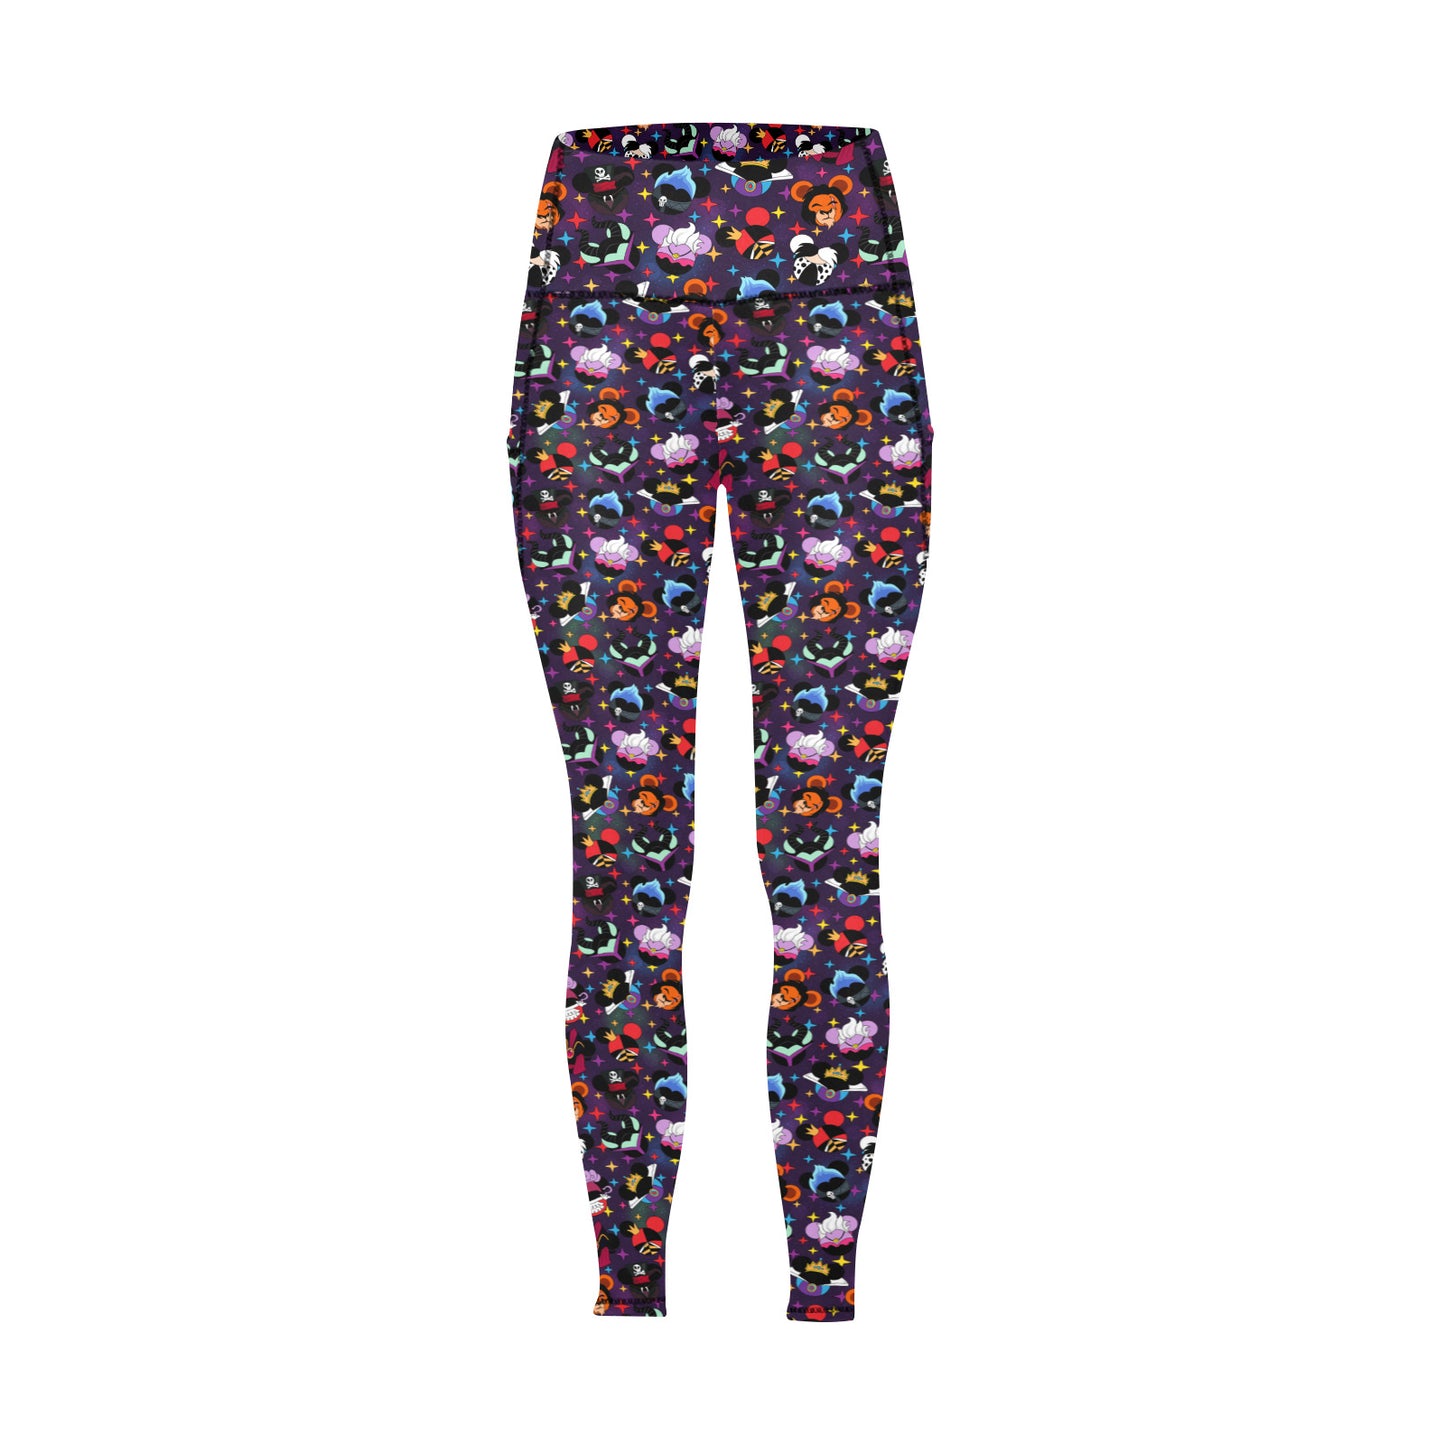 Villains Women's Athletic Leggings With Pockets